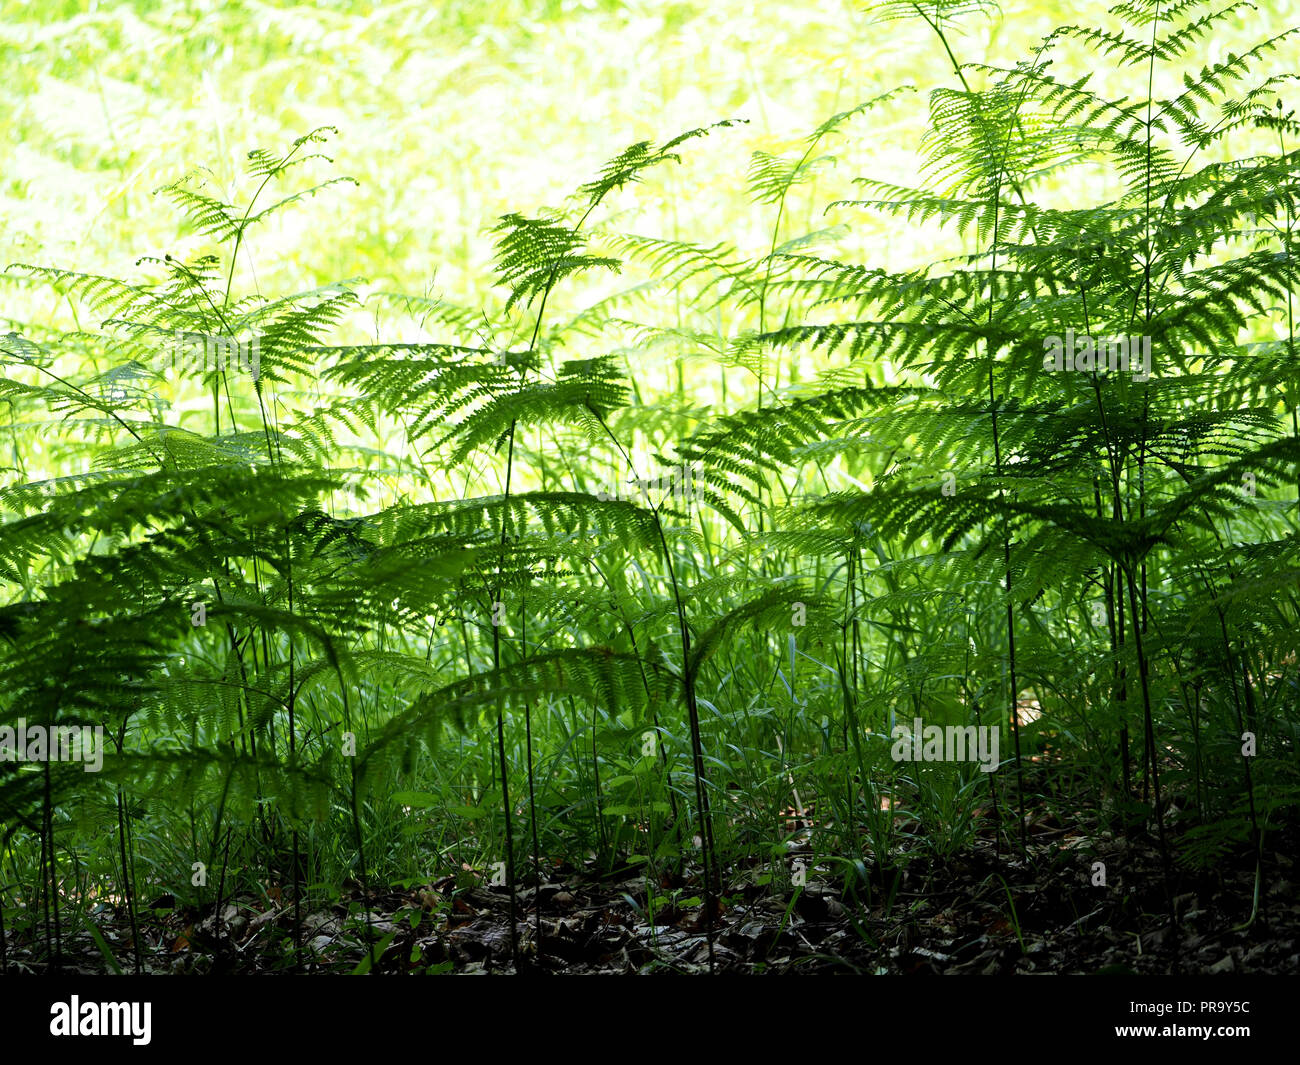 green patterns created by stems and fronds of Bracken (Pteridium aquilinum) on fringe of a forest clearing bathed in sunlight Ariège Pyrénées, France Stock Photo